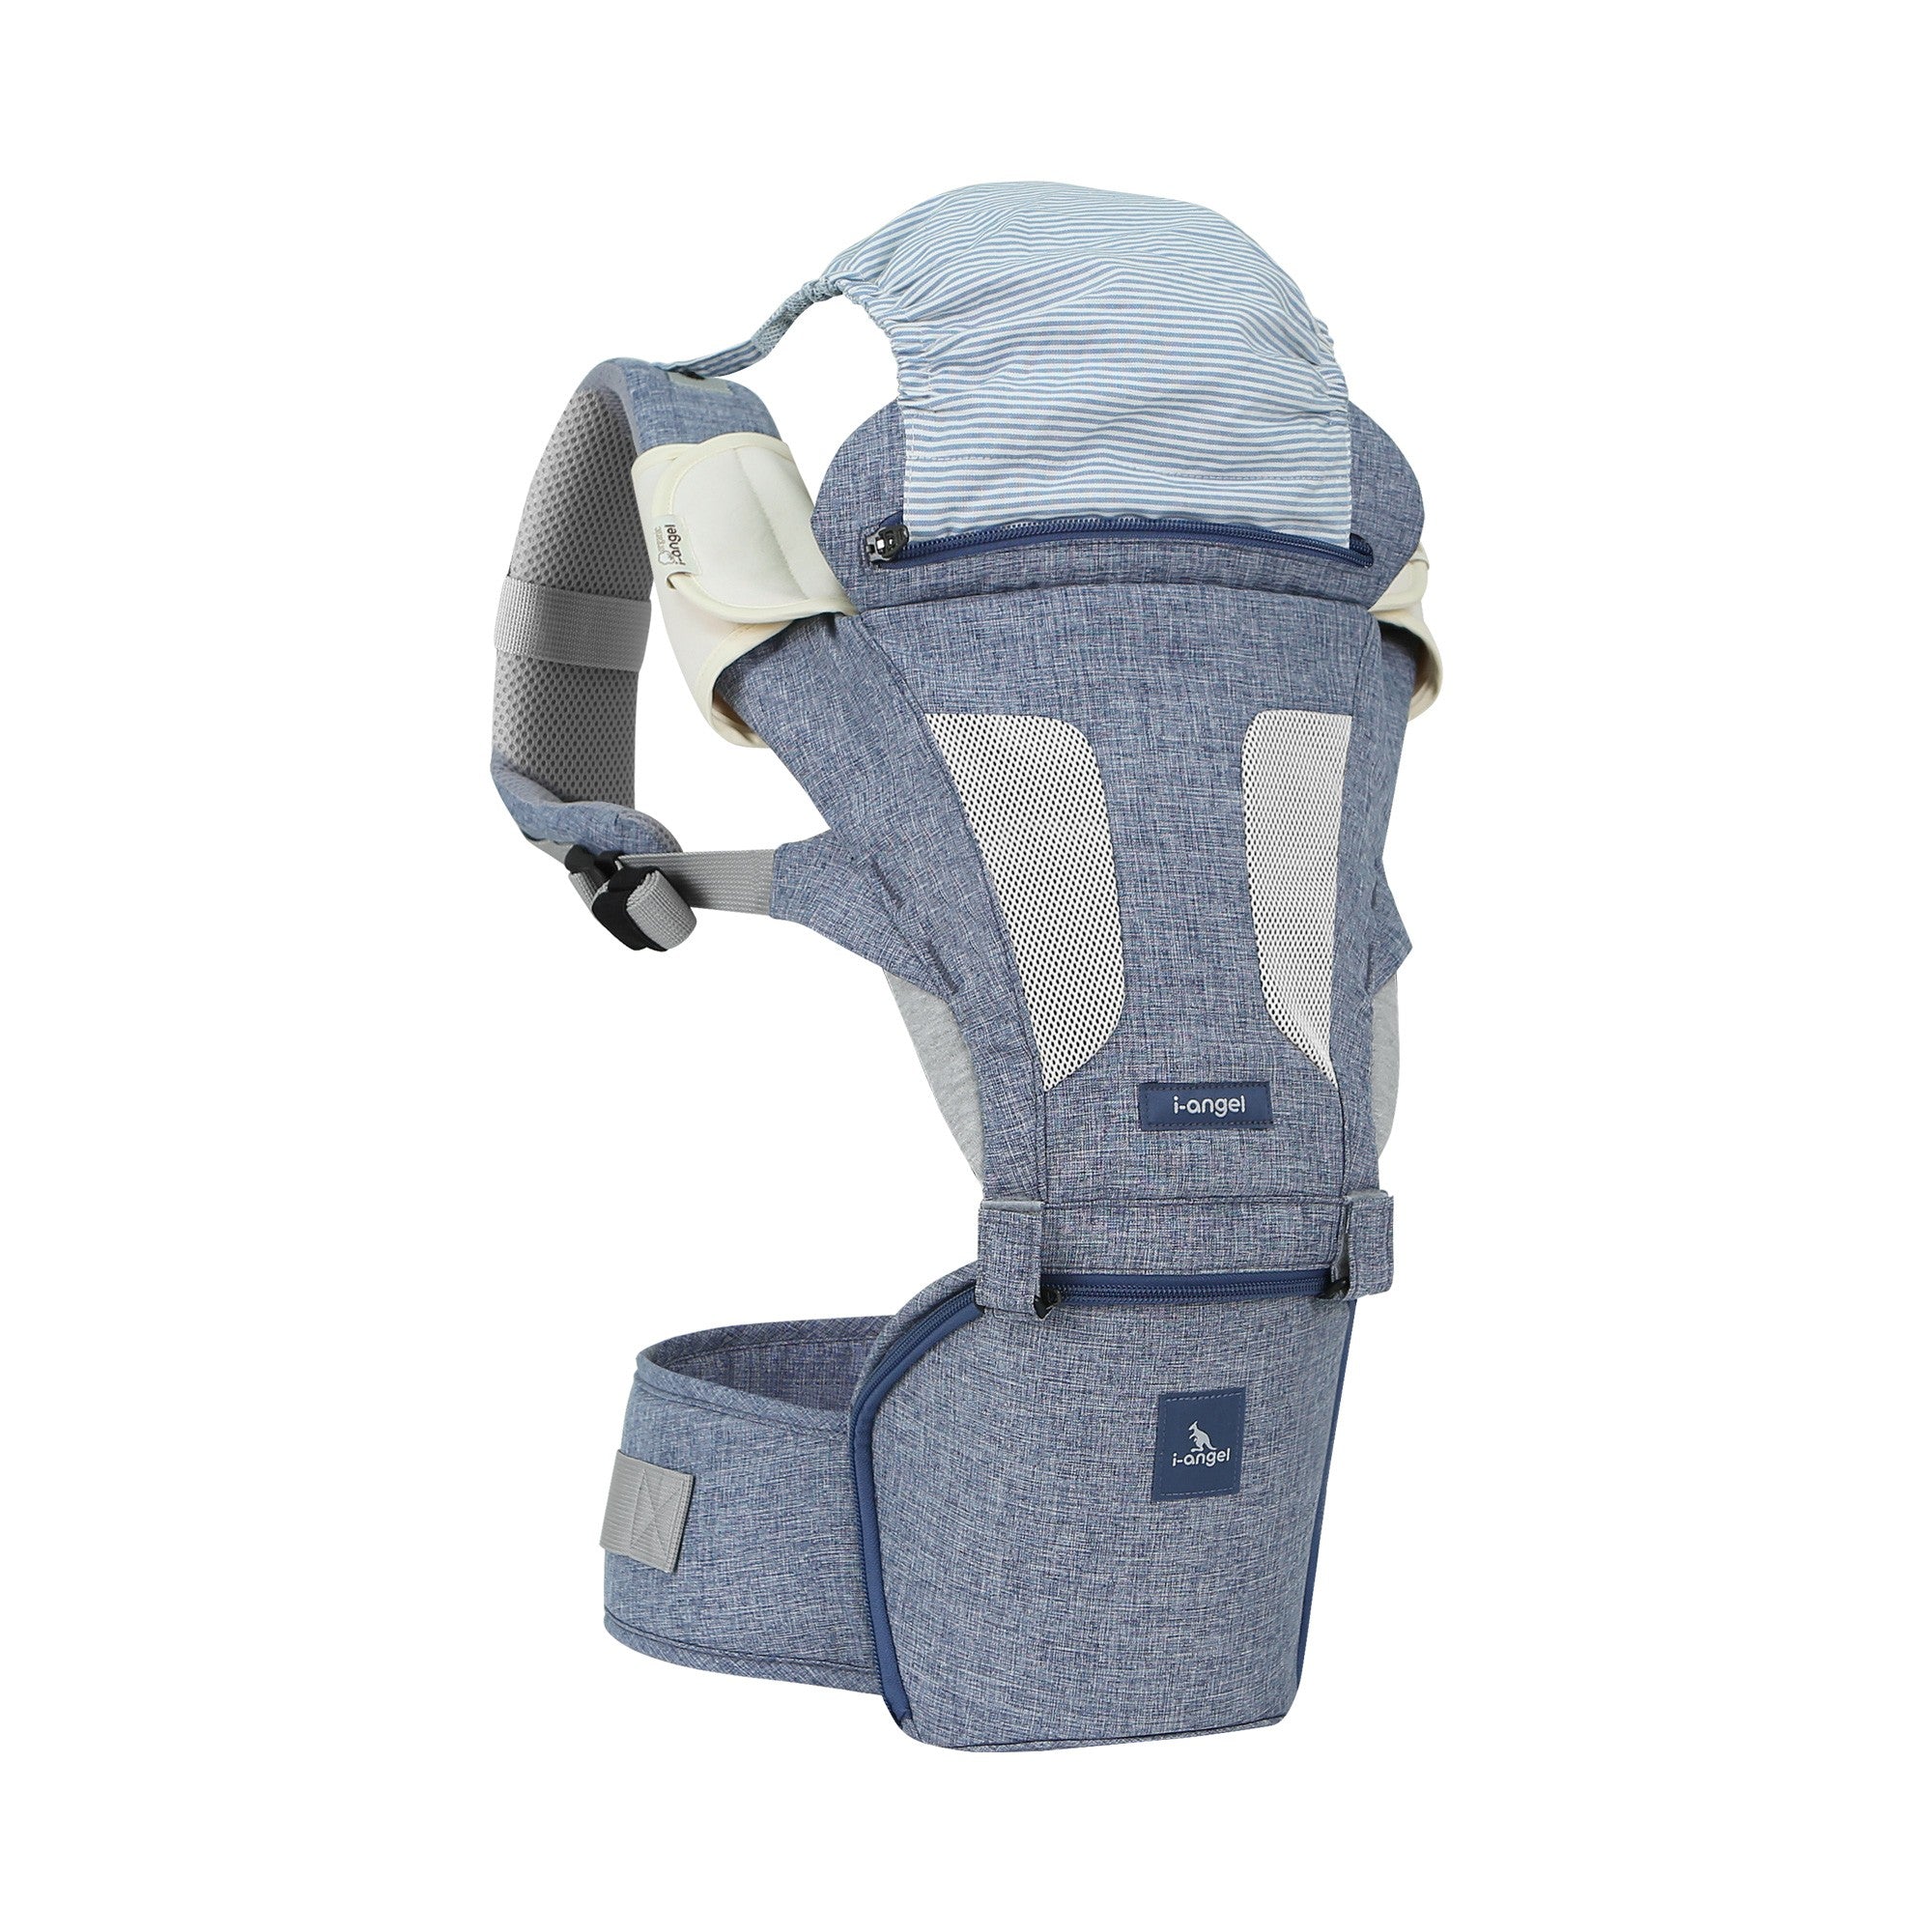 I-ANGEL HIPSEAT CARRIER - NEW MAGIC 7 